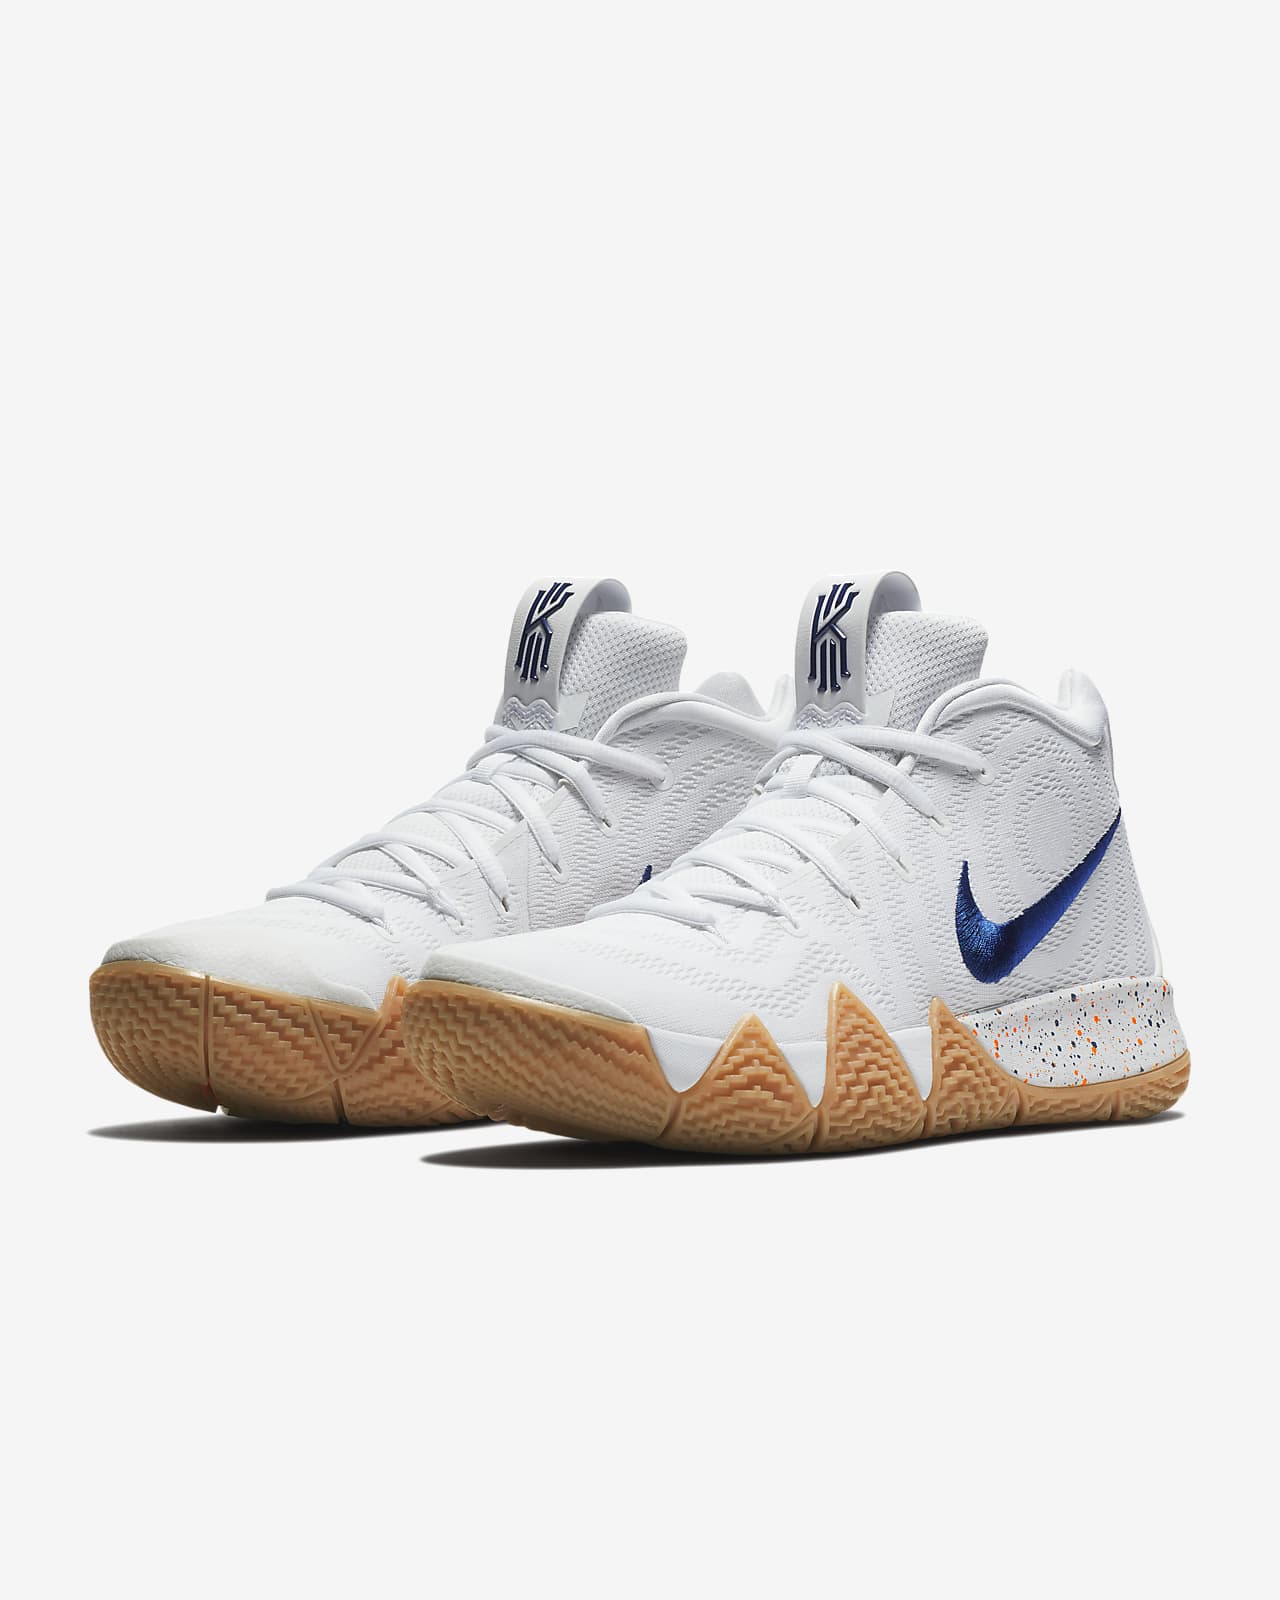 kyrie 4 outdoor